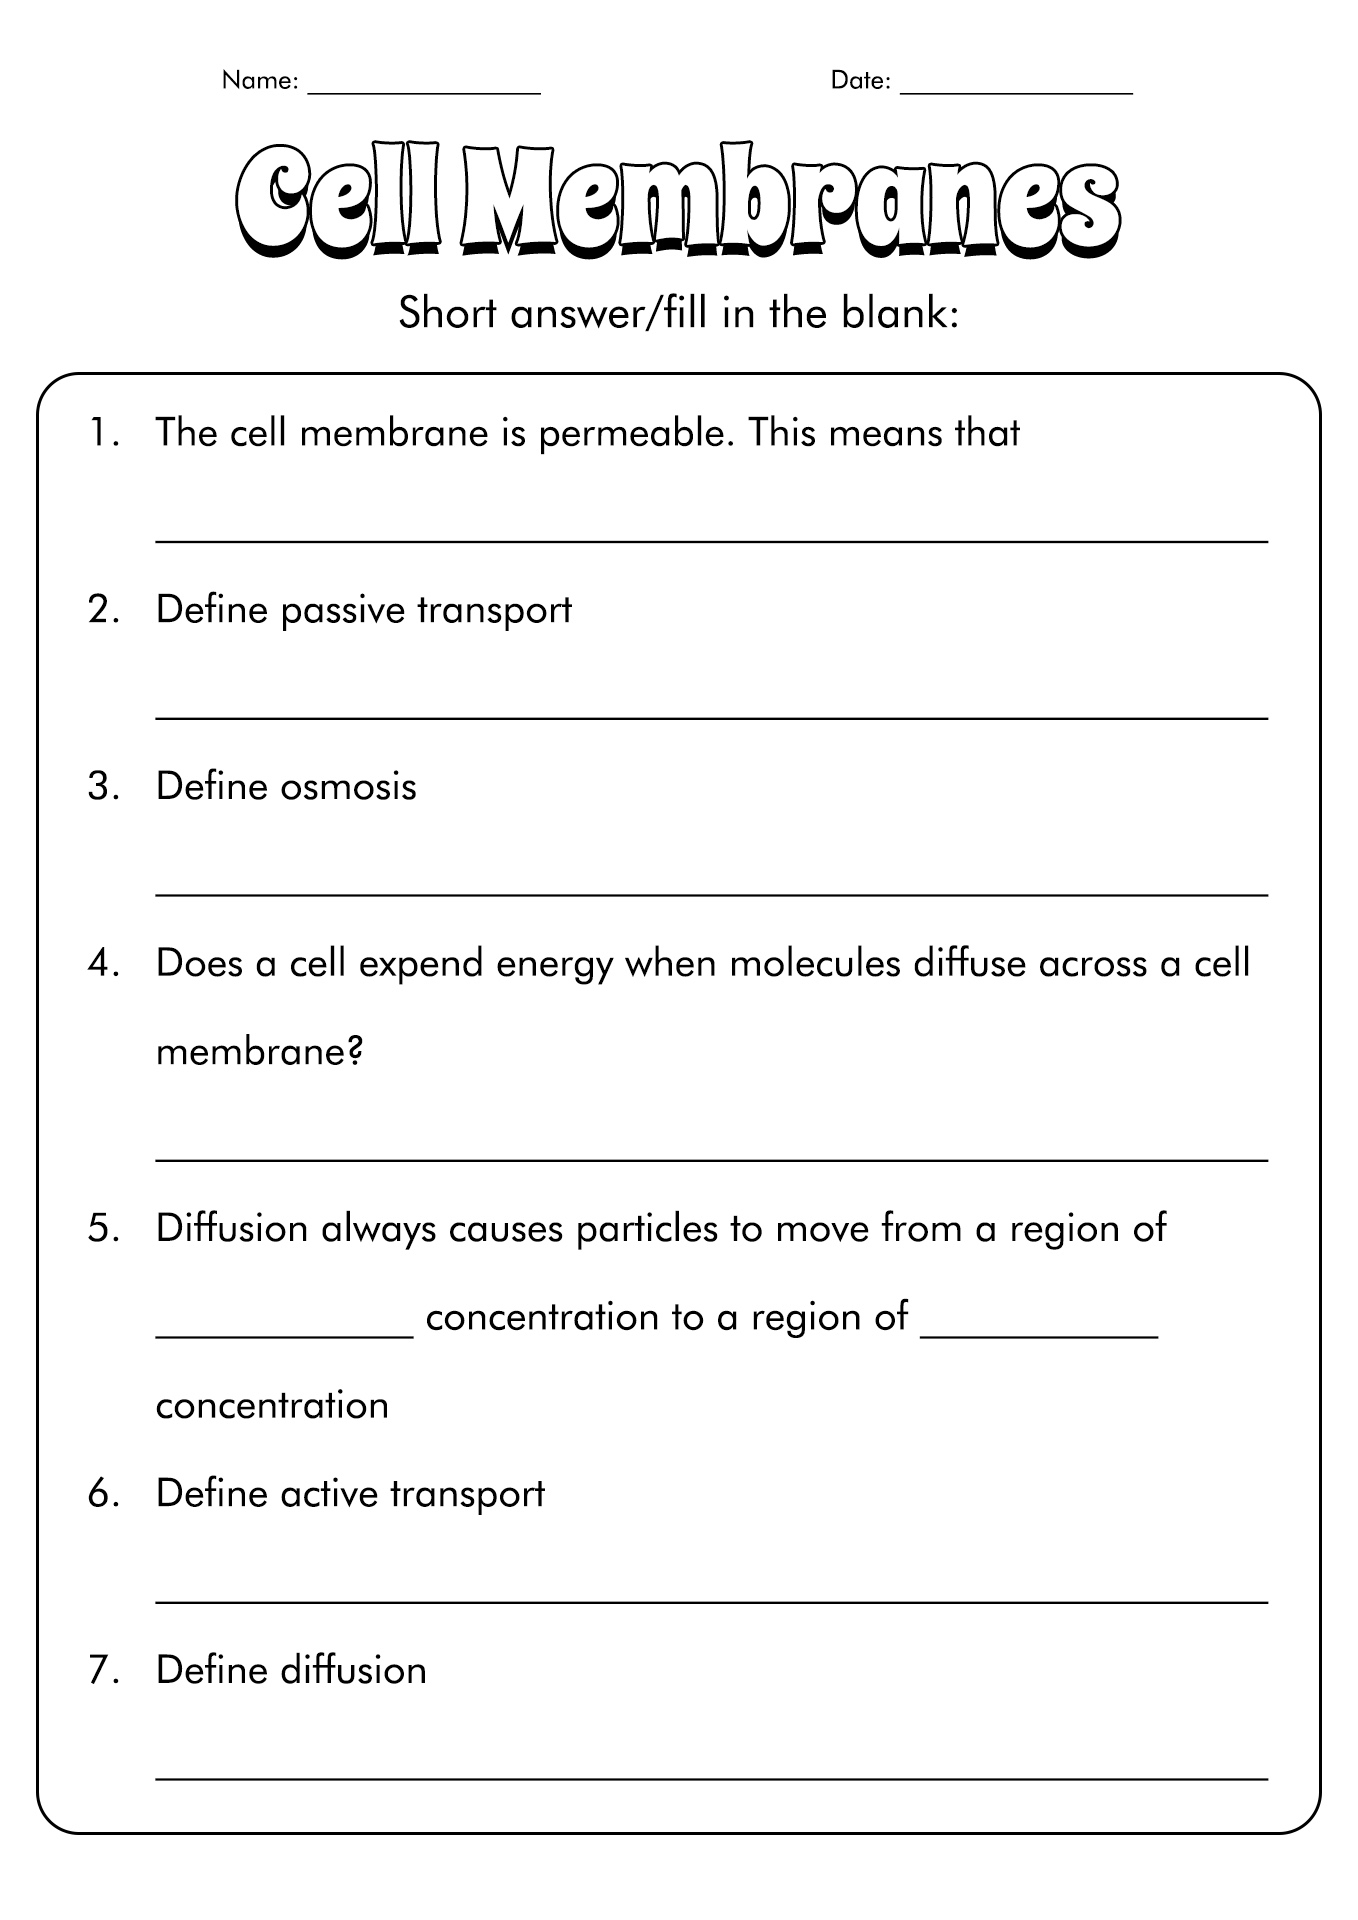 16-best-images-of-diffusion-osmosis-active-transport-worksheet-cell-transport-diffusion-and